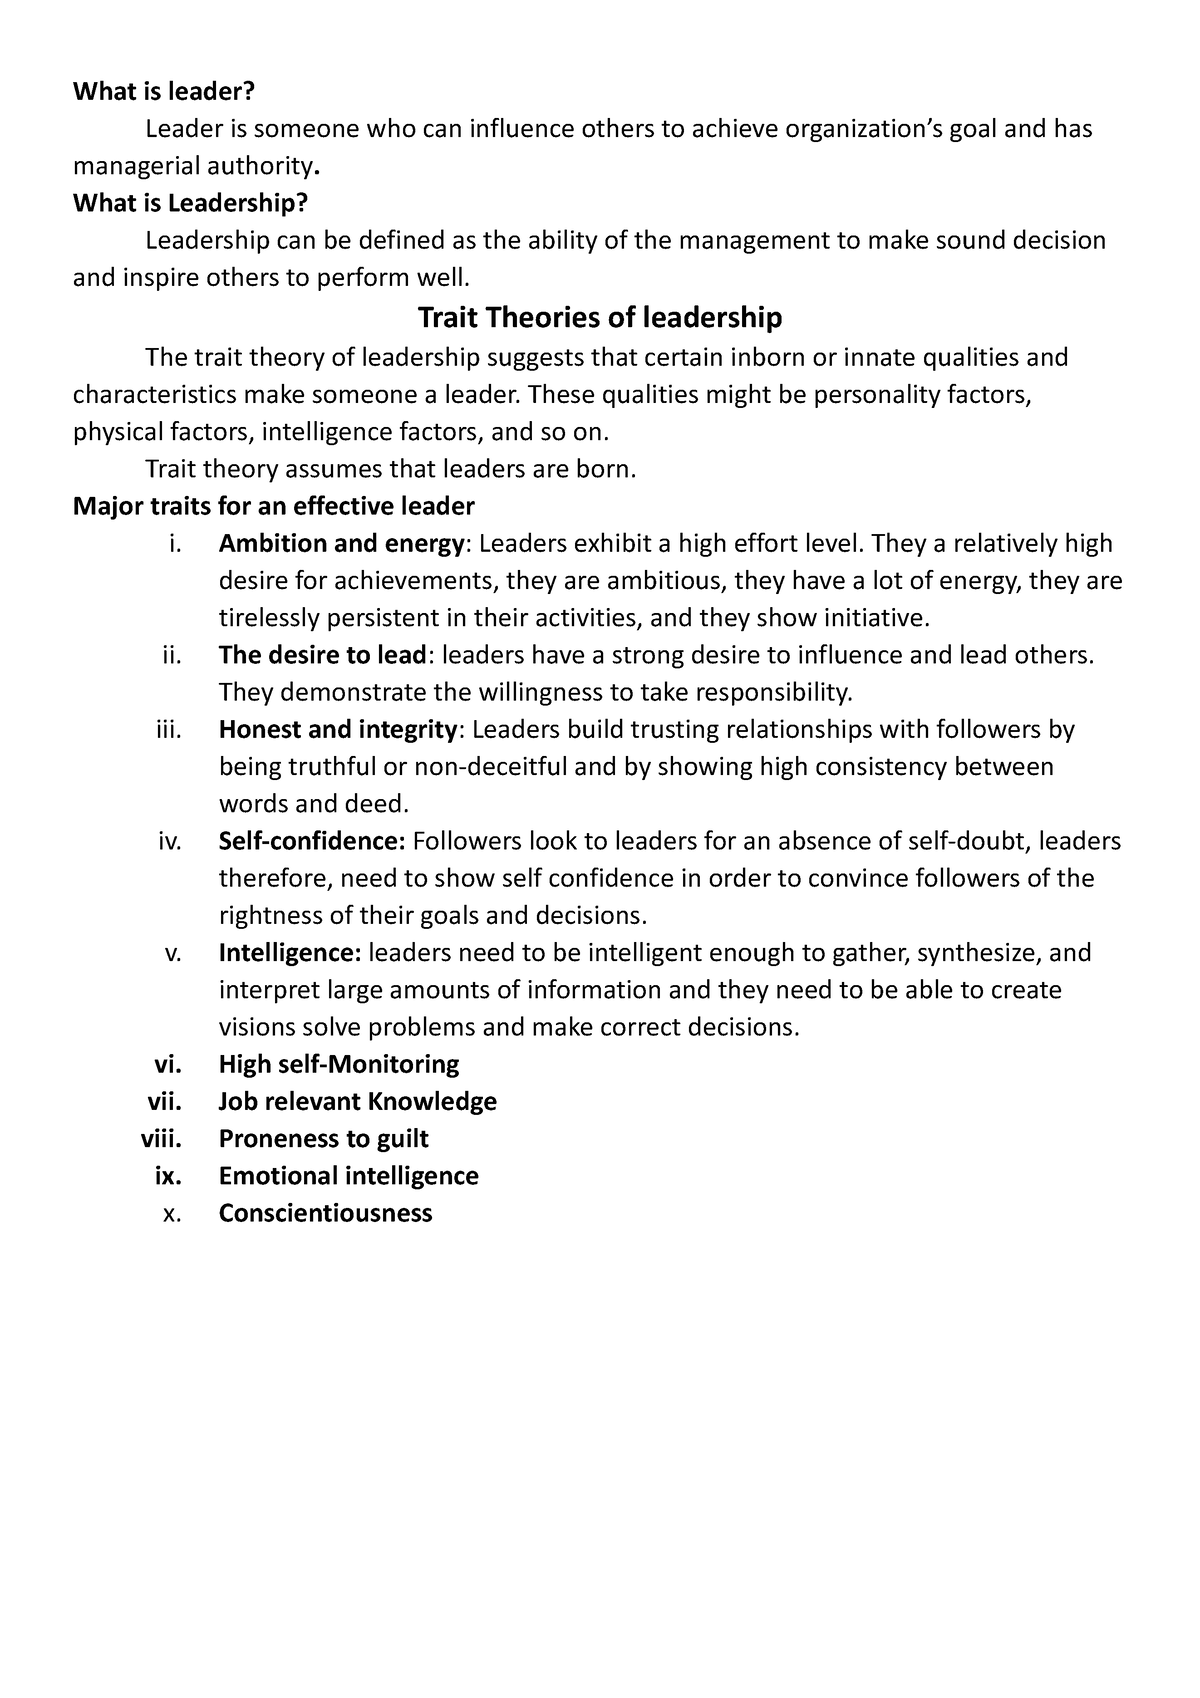 Theories of Leadership - What is leader? Leader is someone who can ...